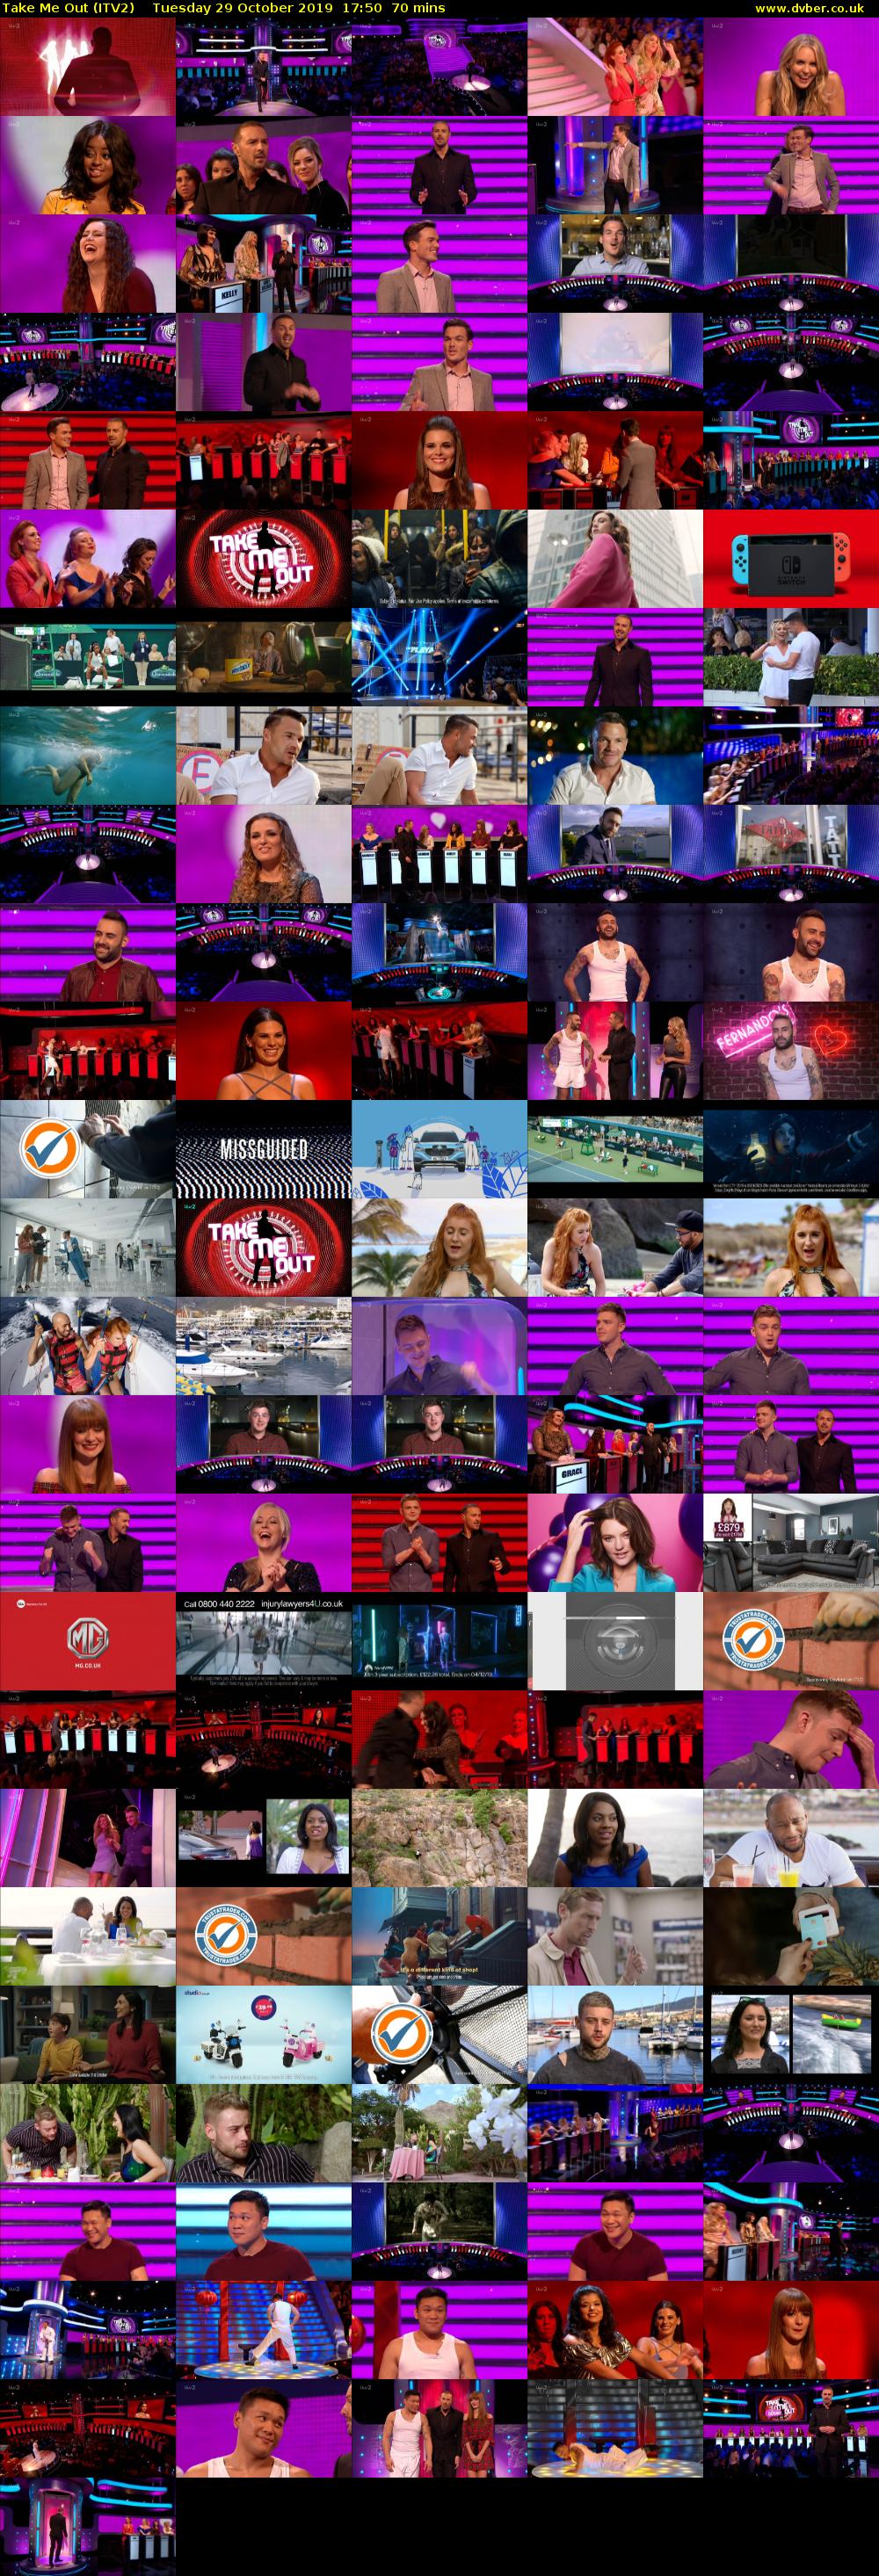 Take Me Out (ITV2) Tuesday 29 October 2019 17:50 - 19:00